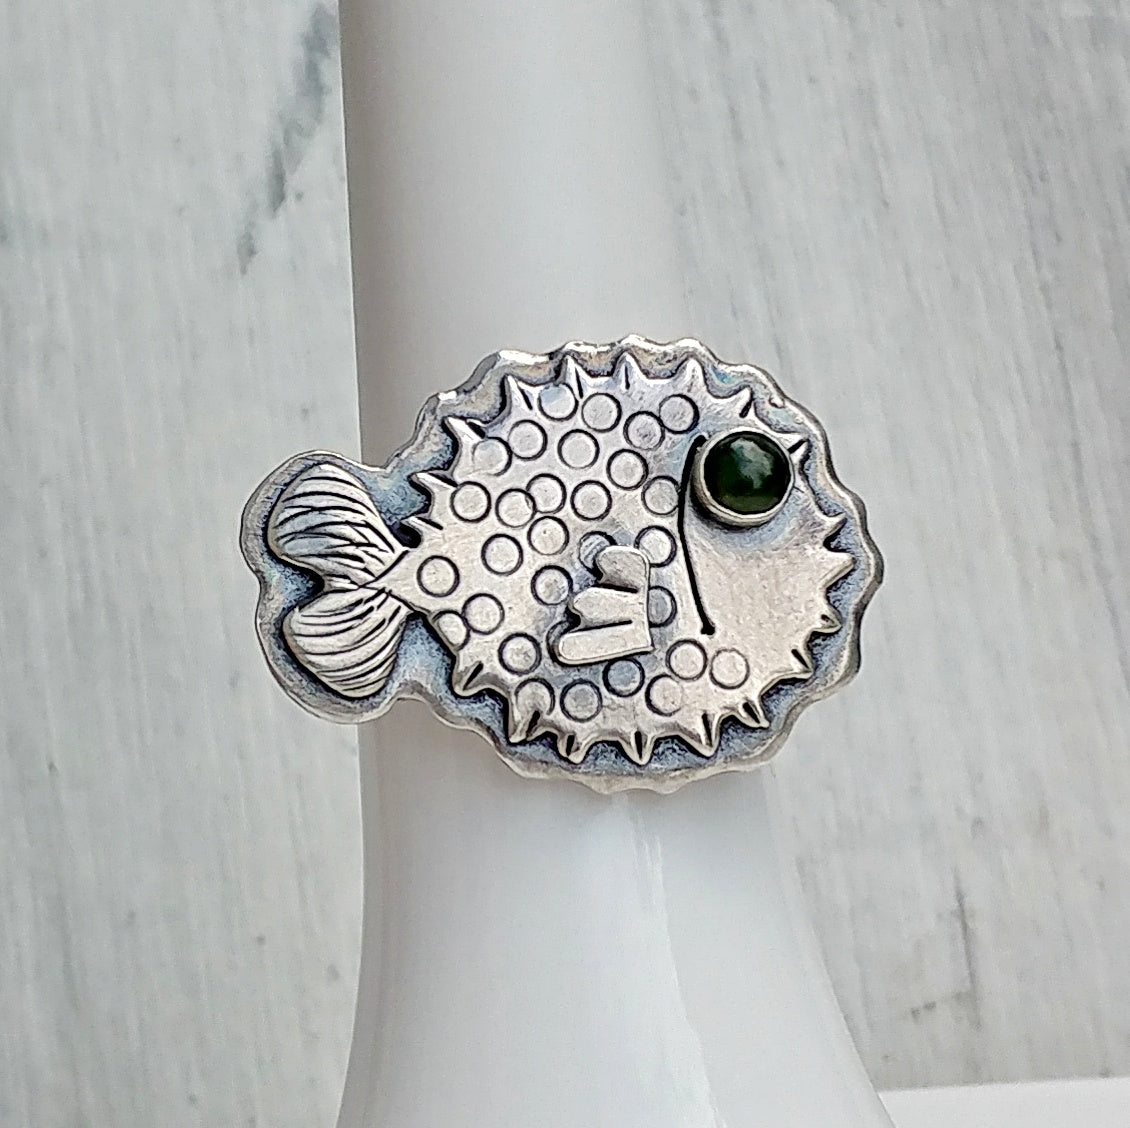 Puffer fish ring in sterling silver